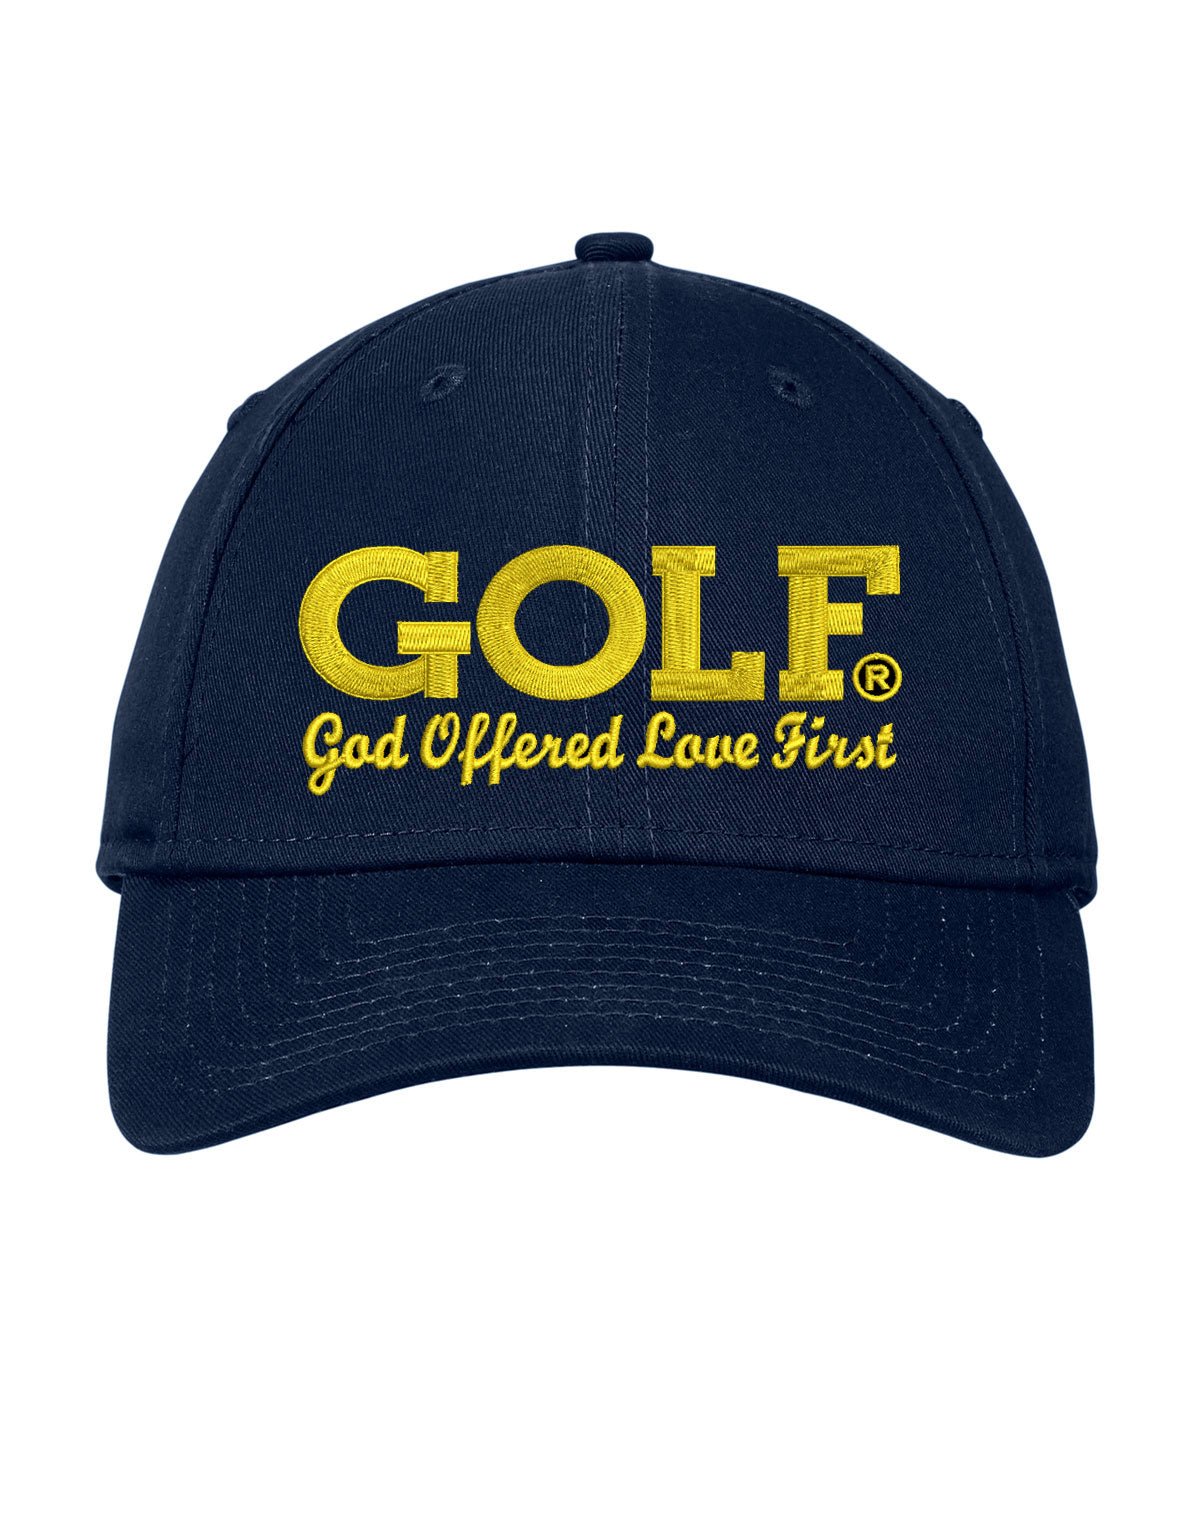 GOLF® Unisex Cap - God Offered Love First® Embroidered New Era Cap® One Size Fits Most Adults - COATES Christian Apparel